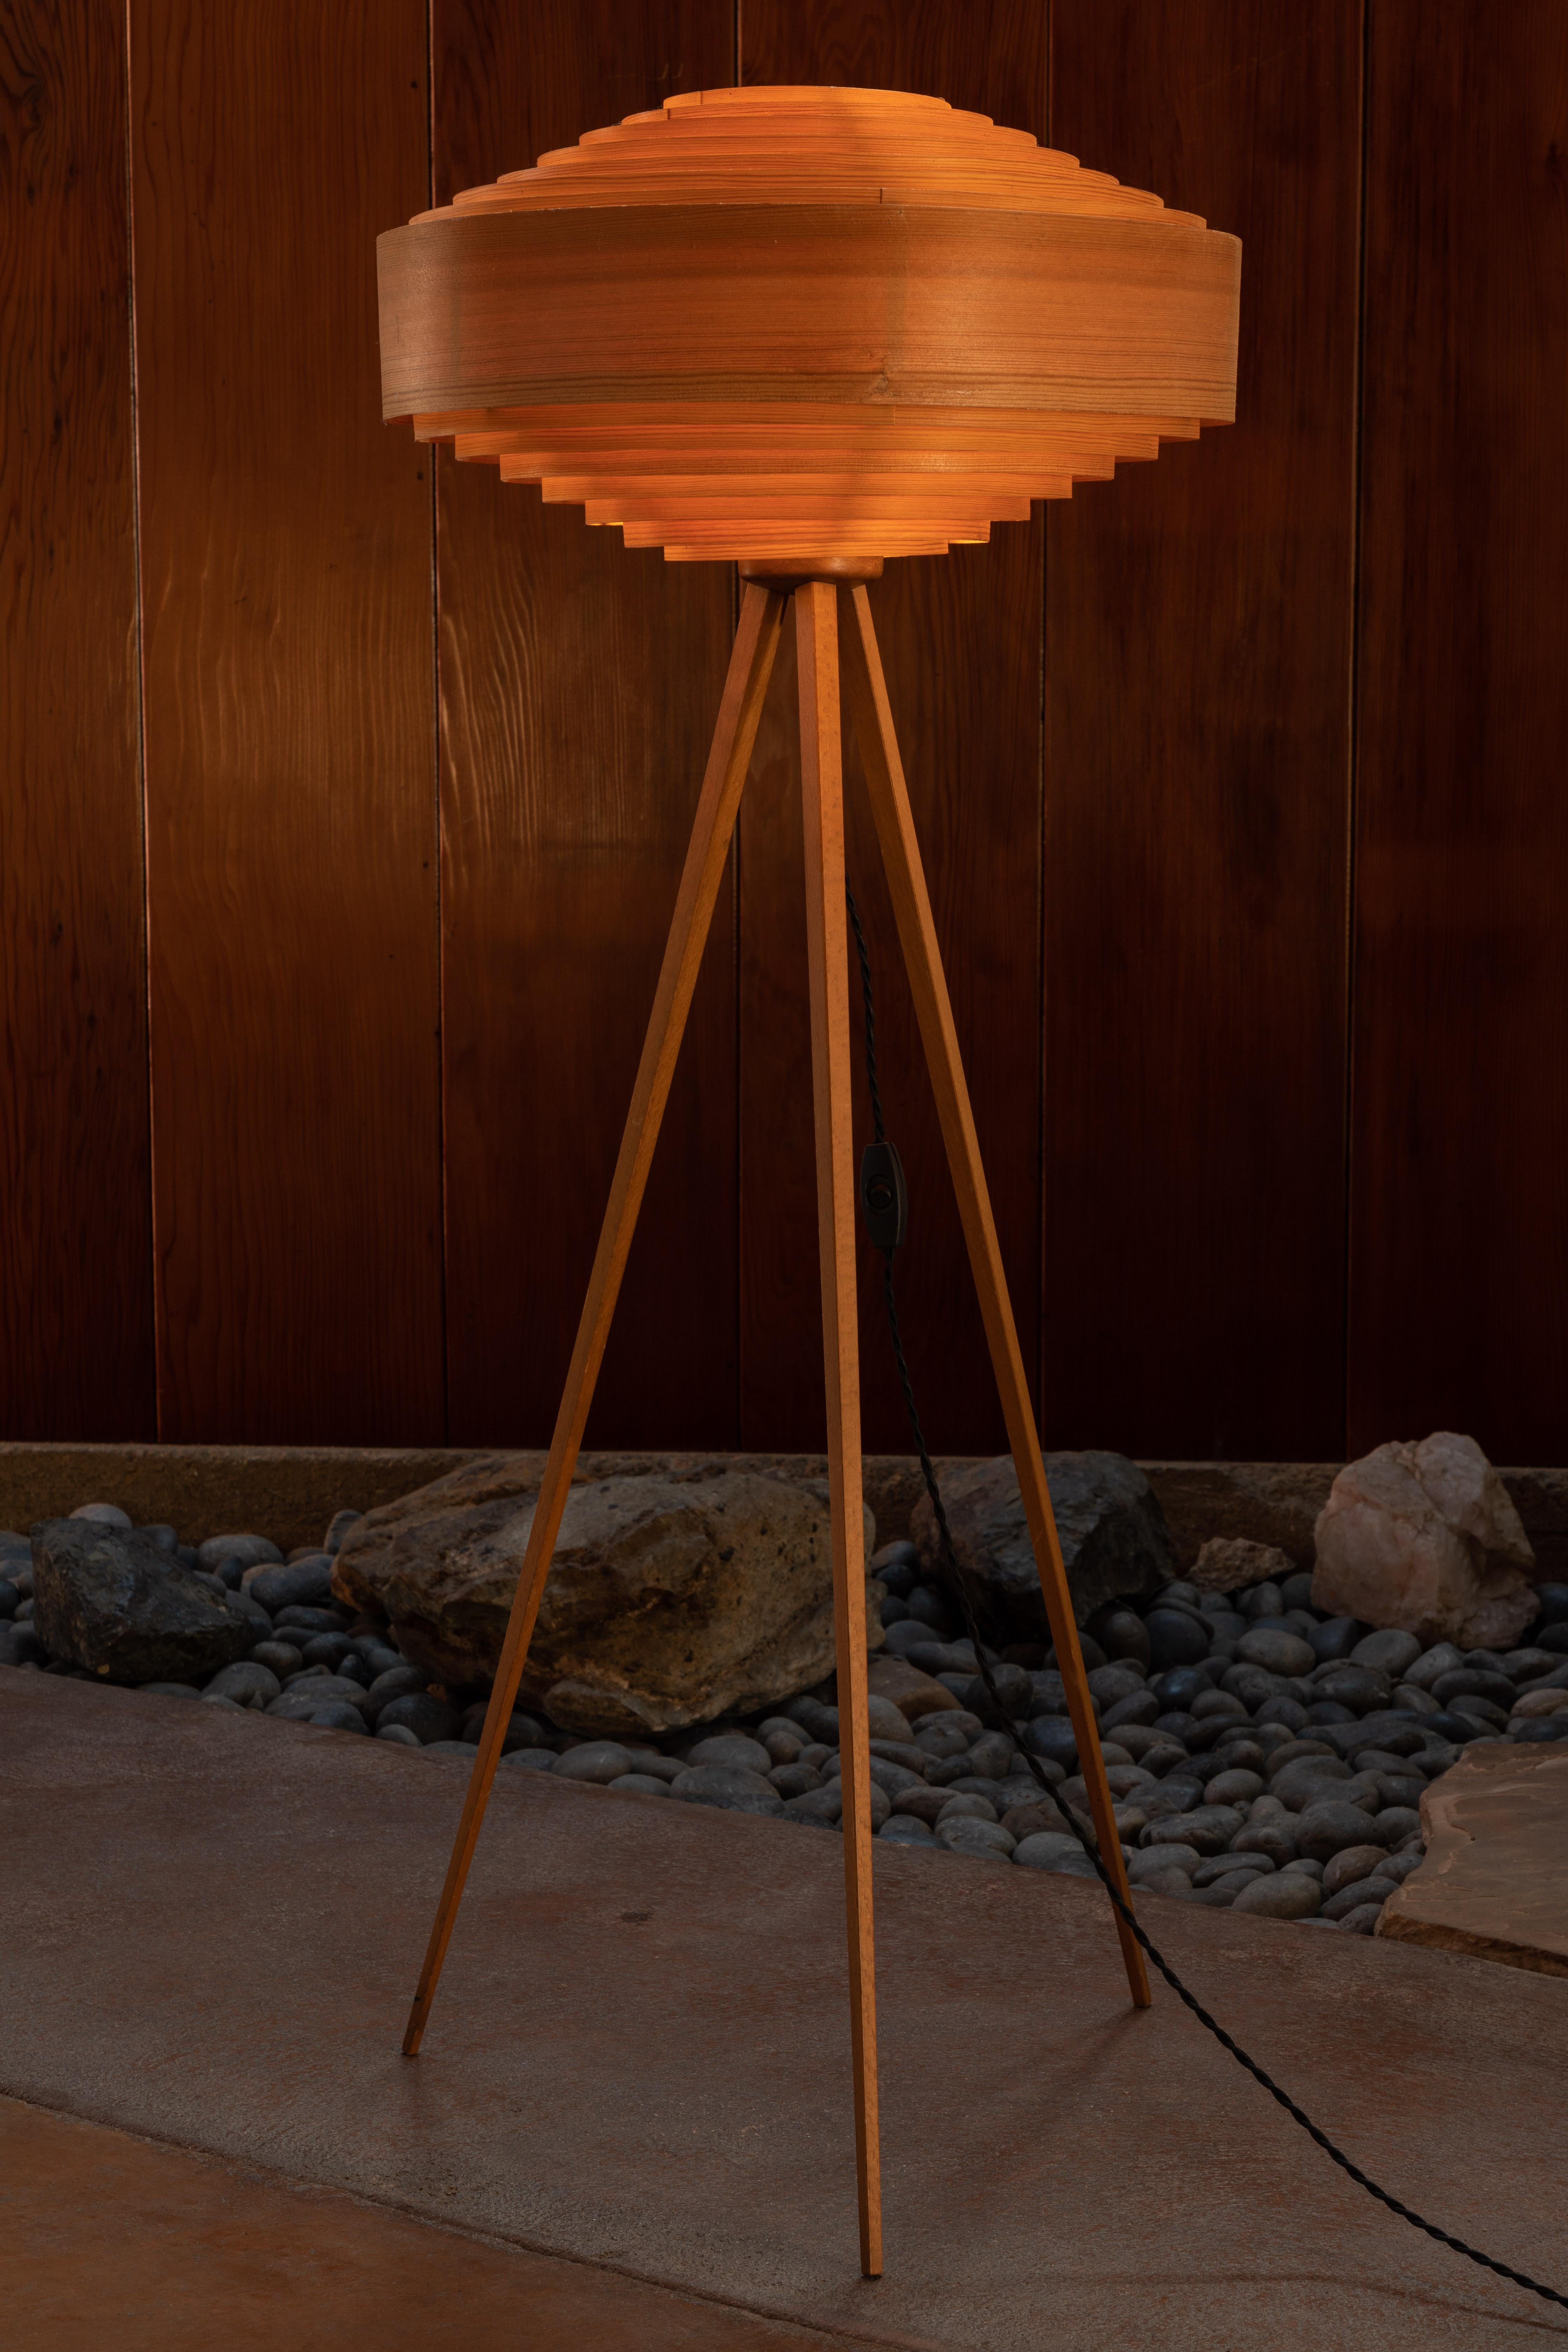 1960s Hans-Agne Jakobsson wood tripod floor lamp for AB Ellysett. Designed and produced by Jakobsson in Markaryd, Sweden and executed in thin bentwood with solid wood tripod legs. A uniquely architectural and rare lamp that is so incredibly delicate